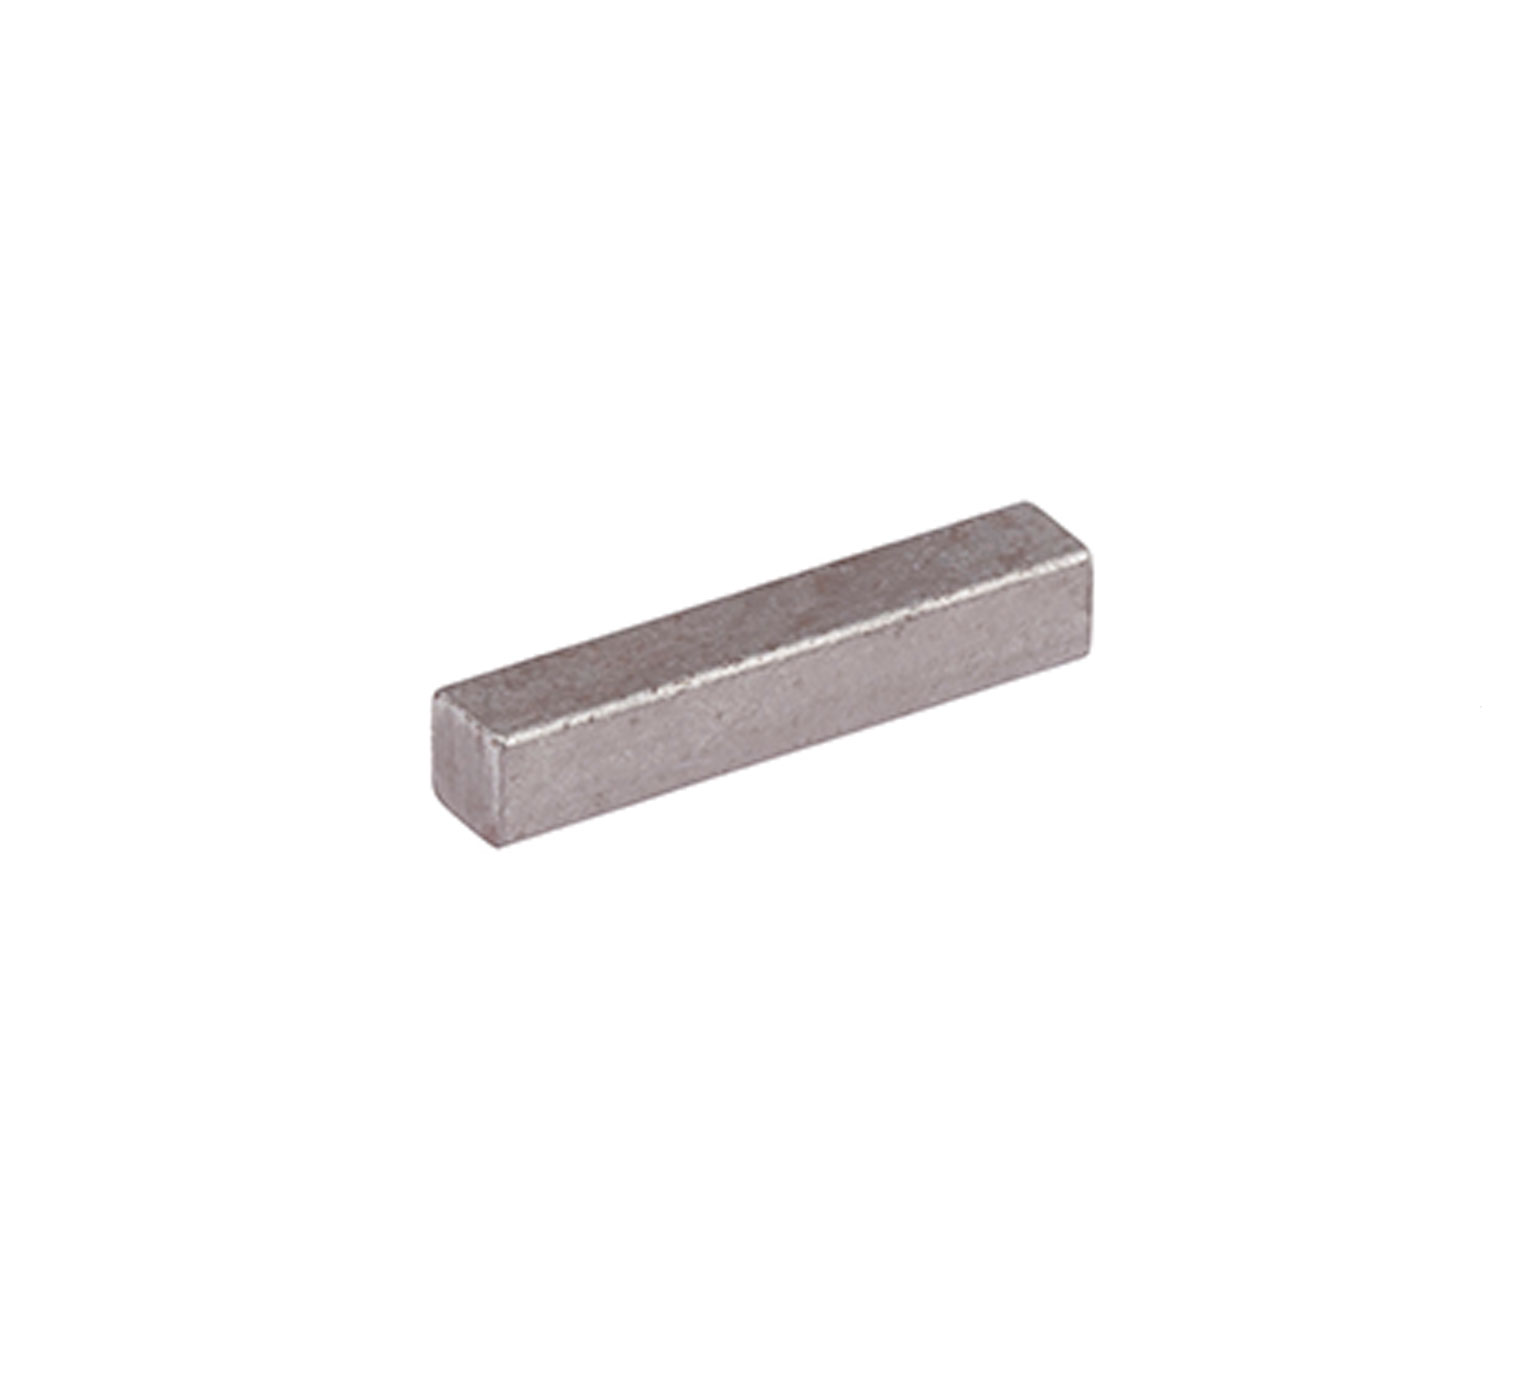 00912 Cold Rolled Steel Key - 0.187 x 0.187 x 1 in alt 1